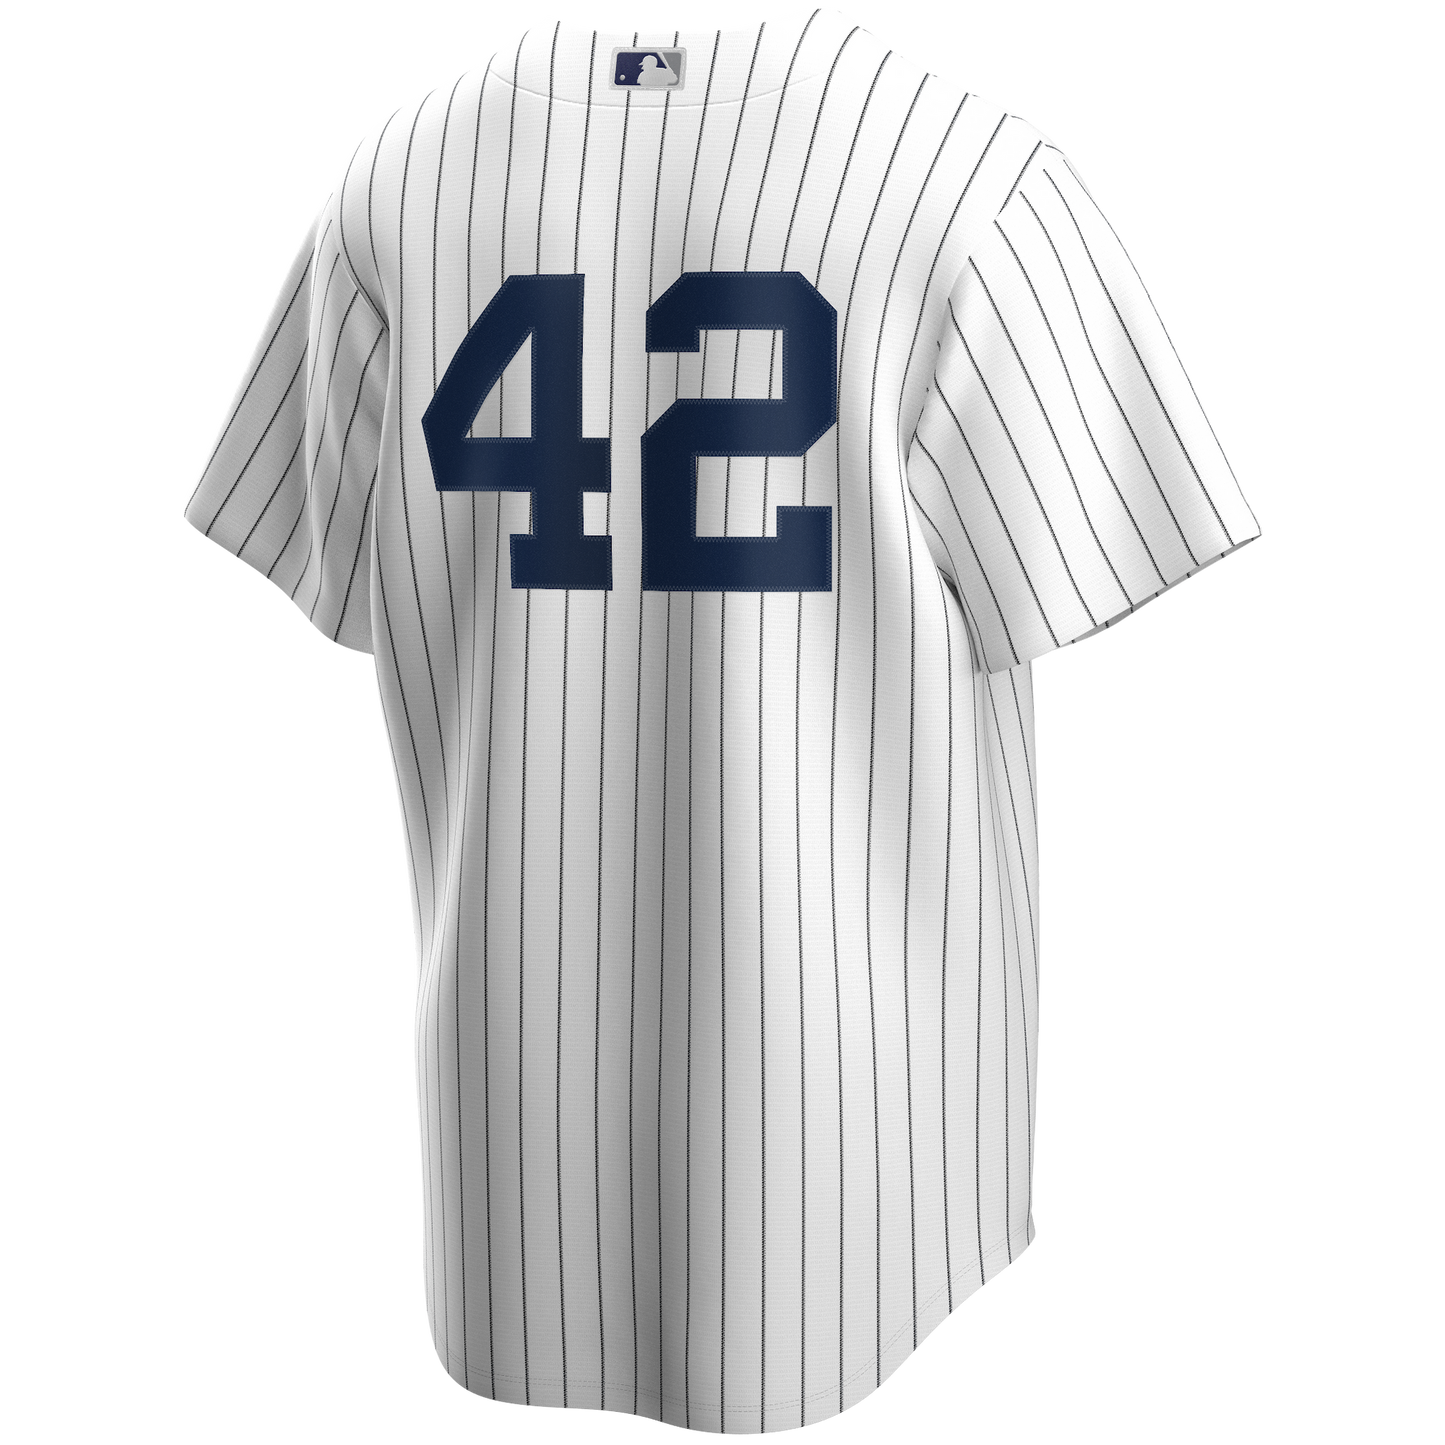 Men's Nike Mariano Rivera White New York Yankees Home Official Replica Player Jersey